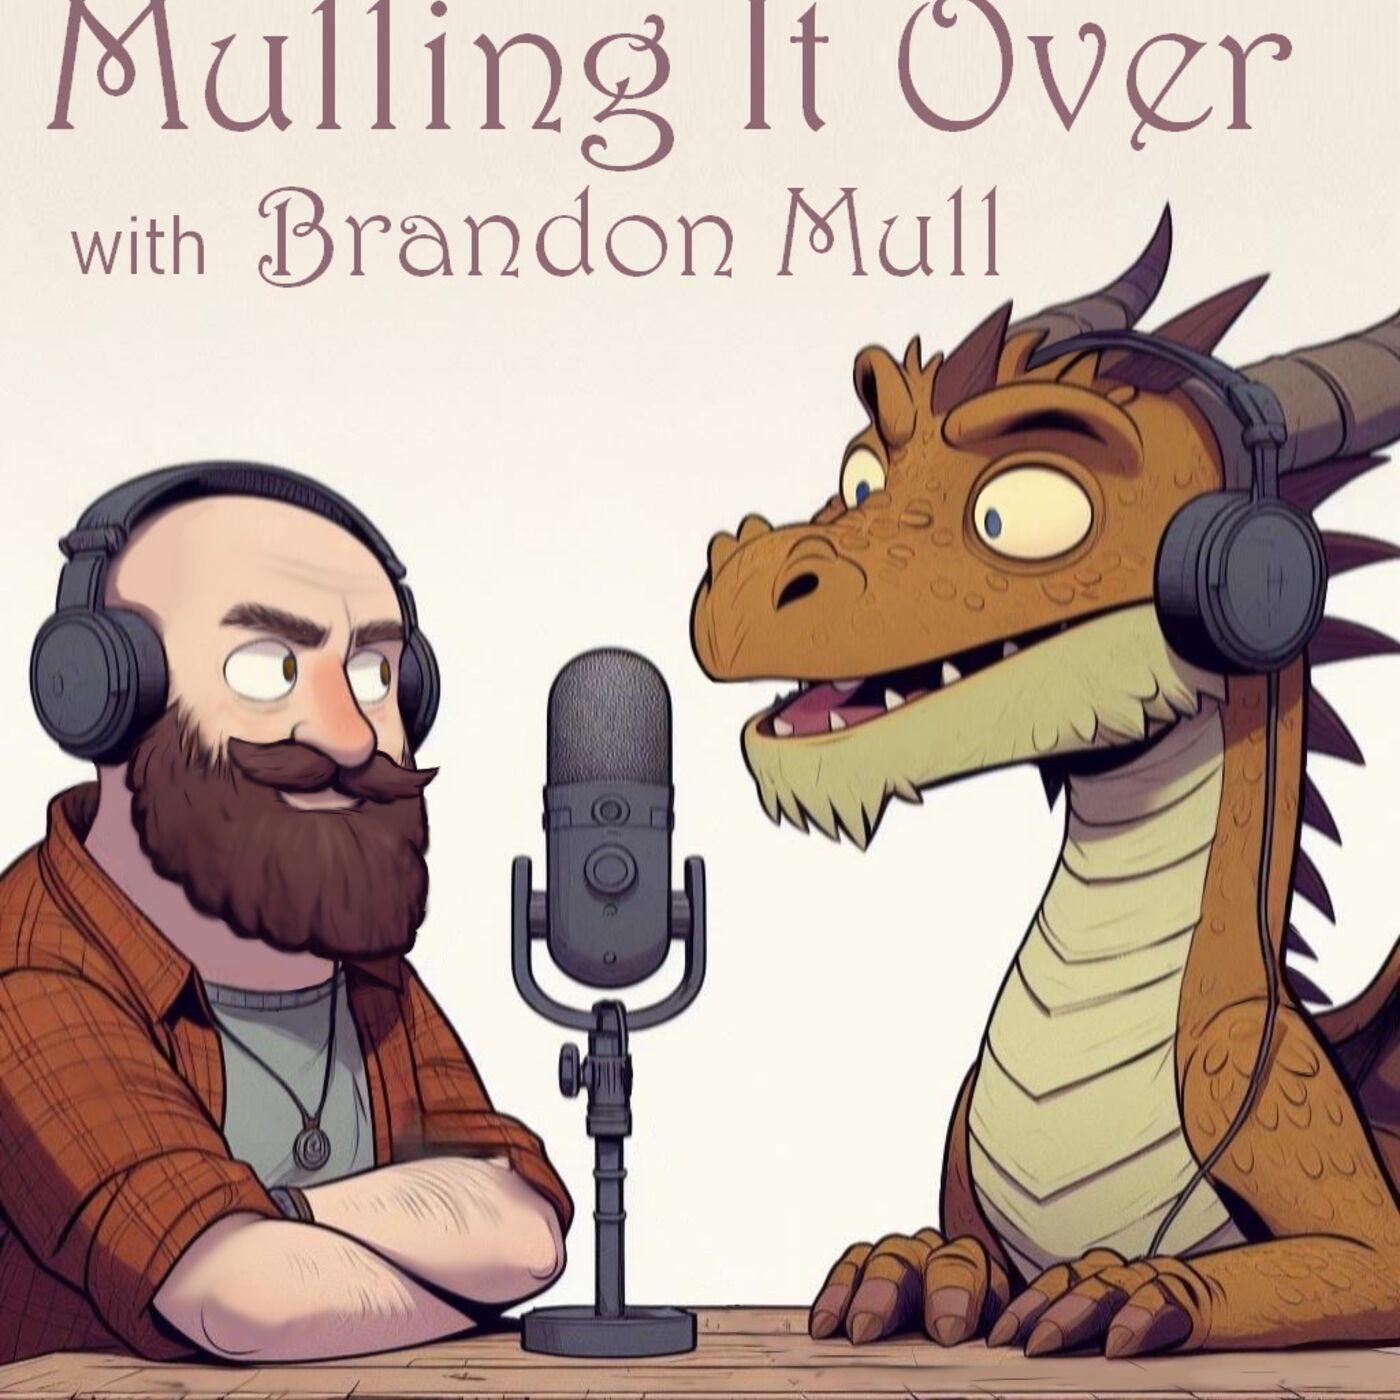 Mulling It Over - with Brandon Mull